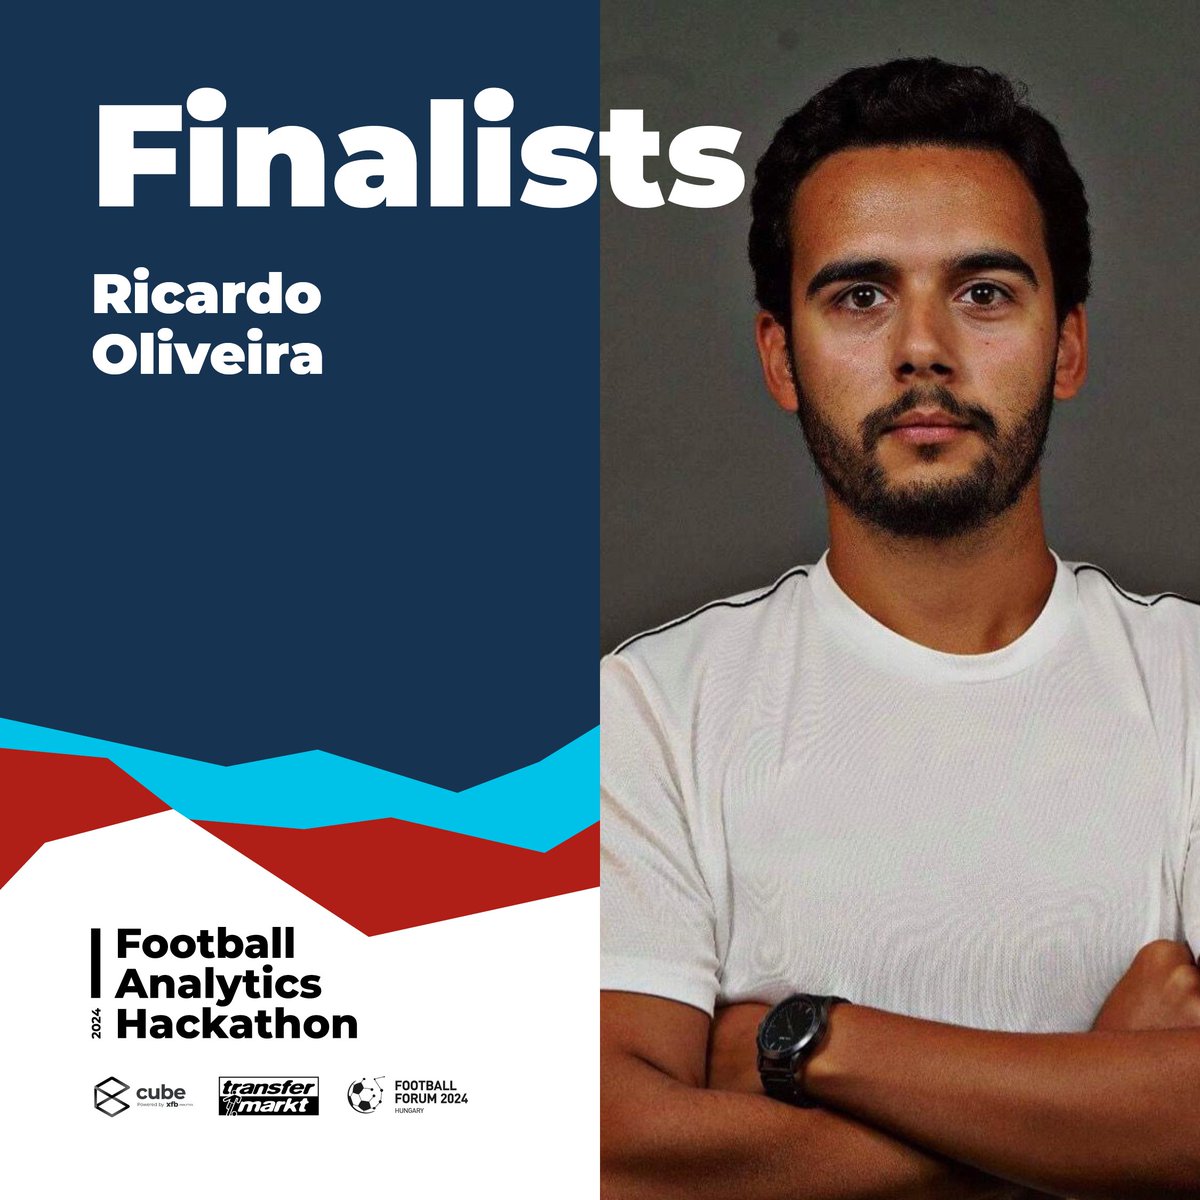 🔥INTRODUCING HACKATHON FINALISTS🔥 Ricardo Oliveira (25, Portugal) Has a Master's in Sports Management and has already had several jobs as a director, scout, and analyst in Portuguese football clubs, as well as foreign experience in Greece. Now, he’s supporting the